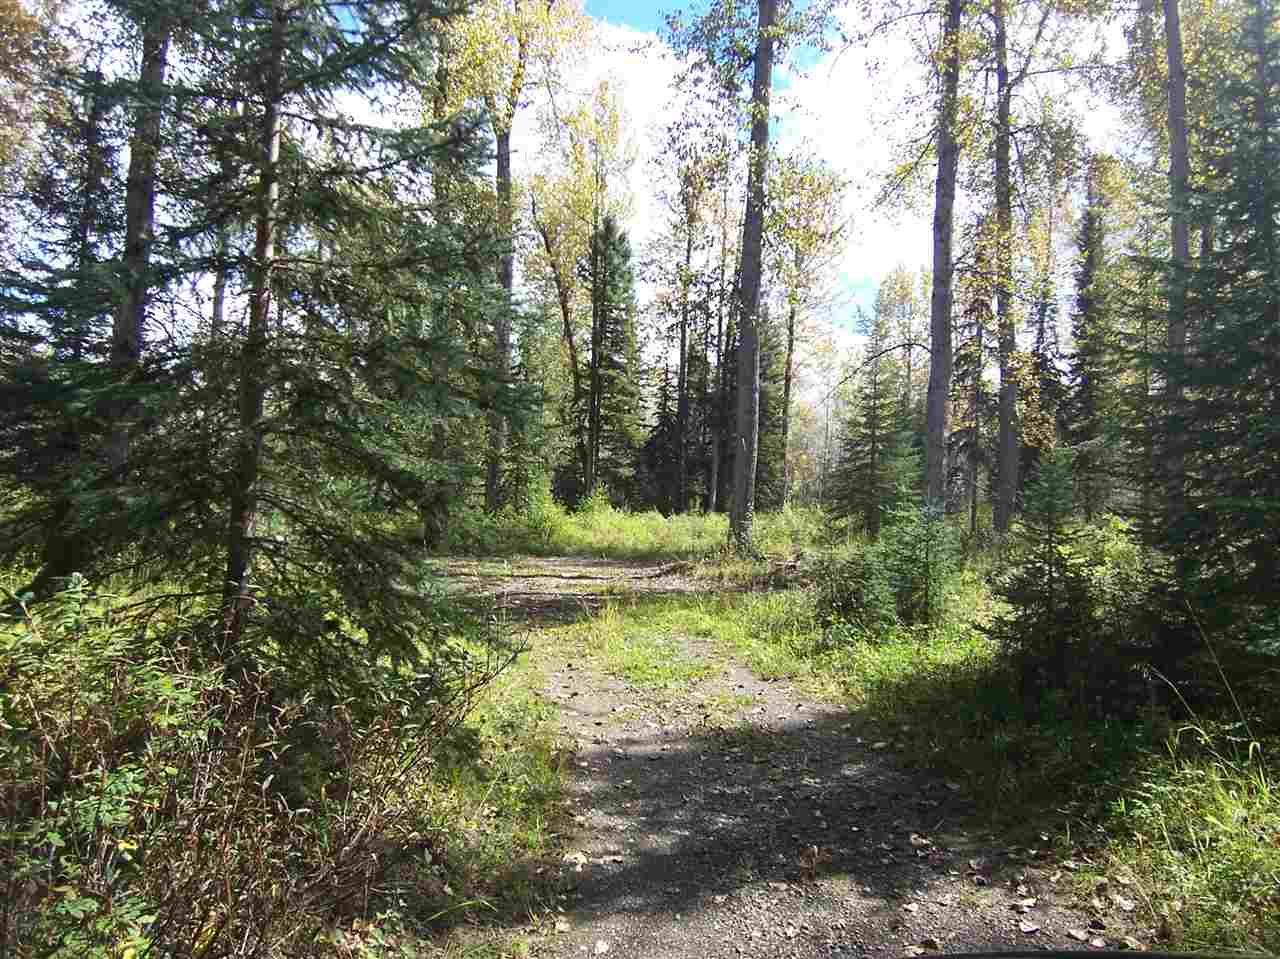 Photo 13: Photos: 4682 BARKERVILLE Highway in Quesnel: Quesnel - Rural North Land for sale (Quesnel (Zone 28))  : MLS®# R2105293